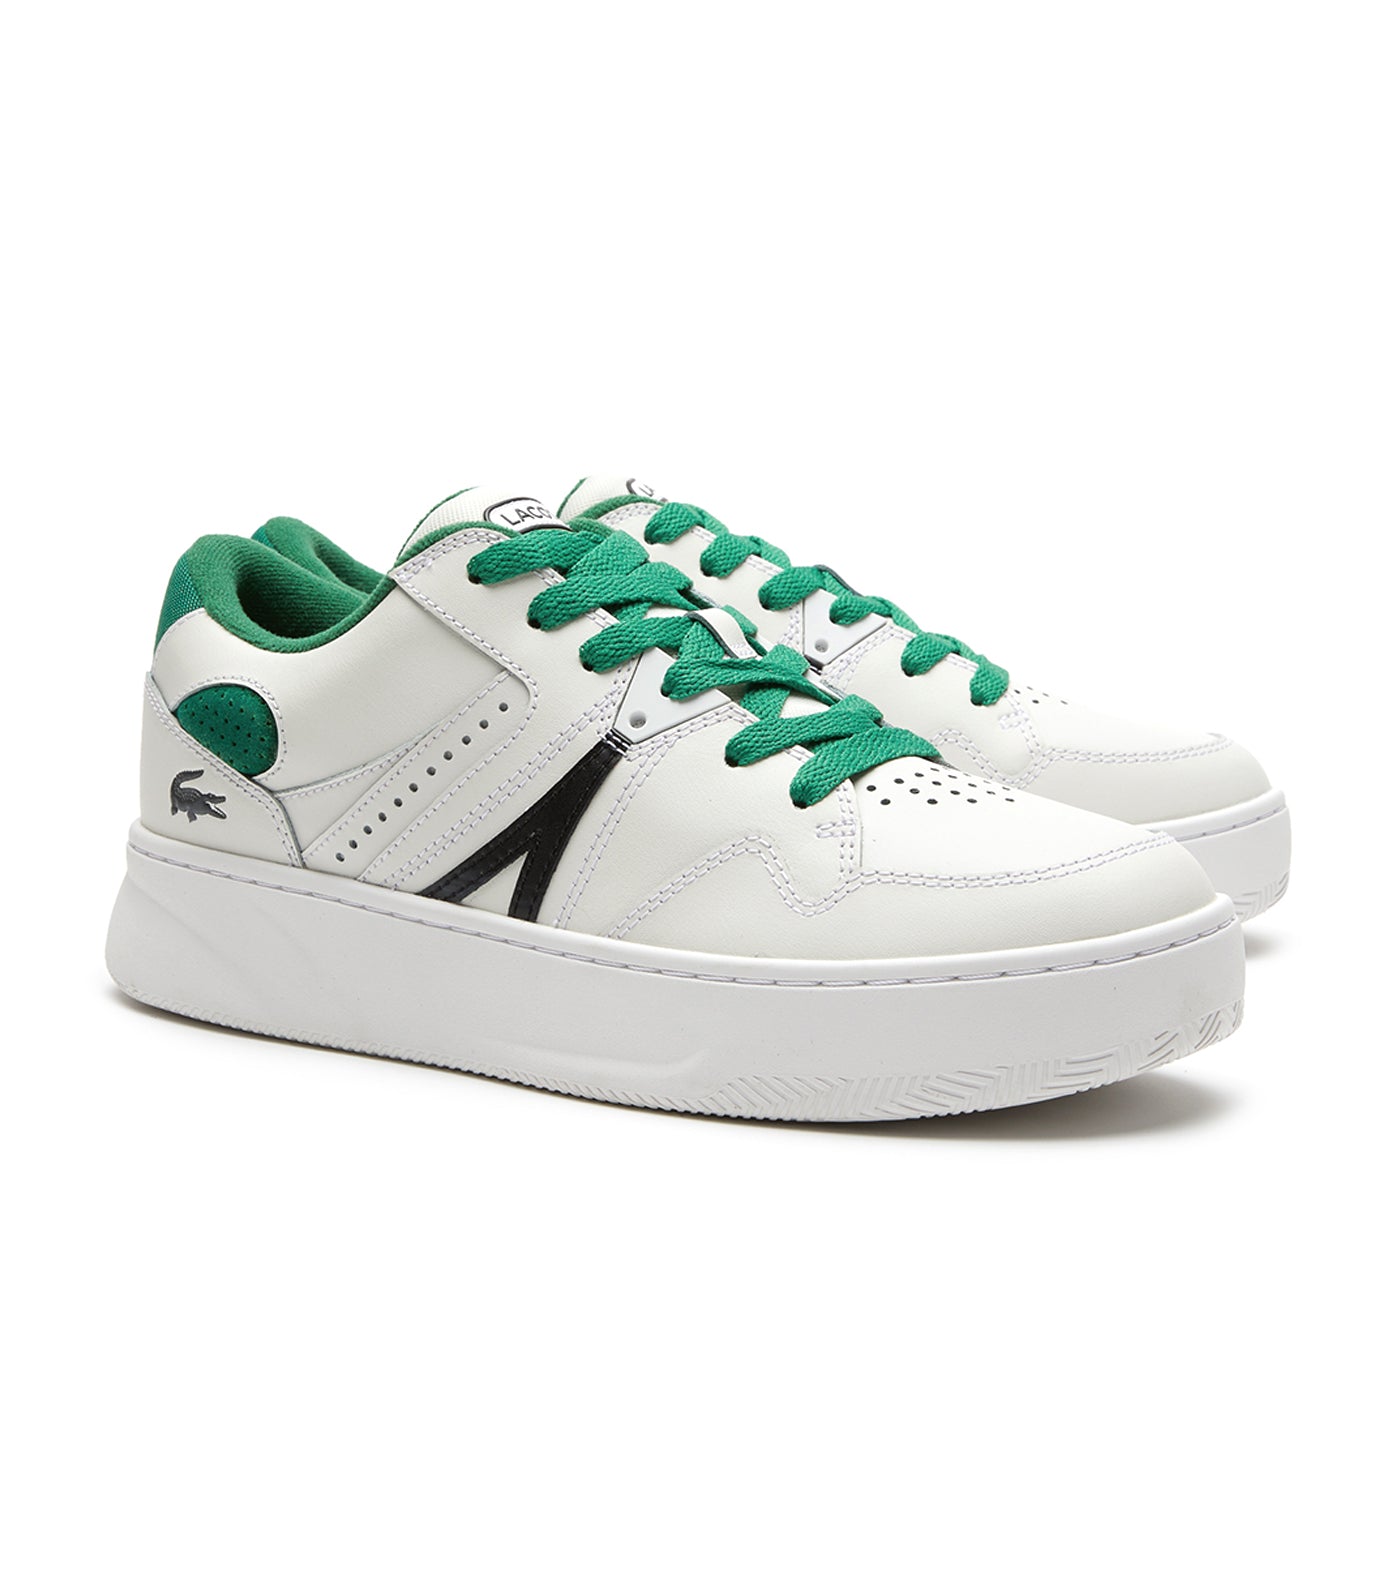 Men's L005 Leather Color-Pop Sneakers White/Green